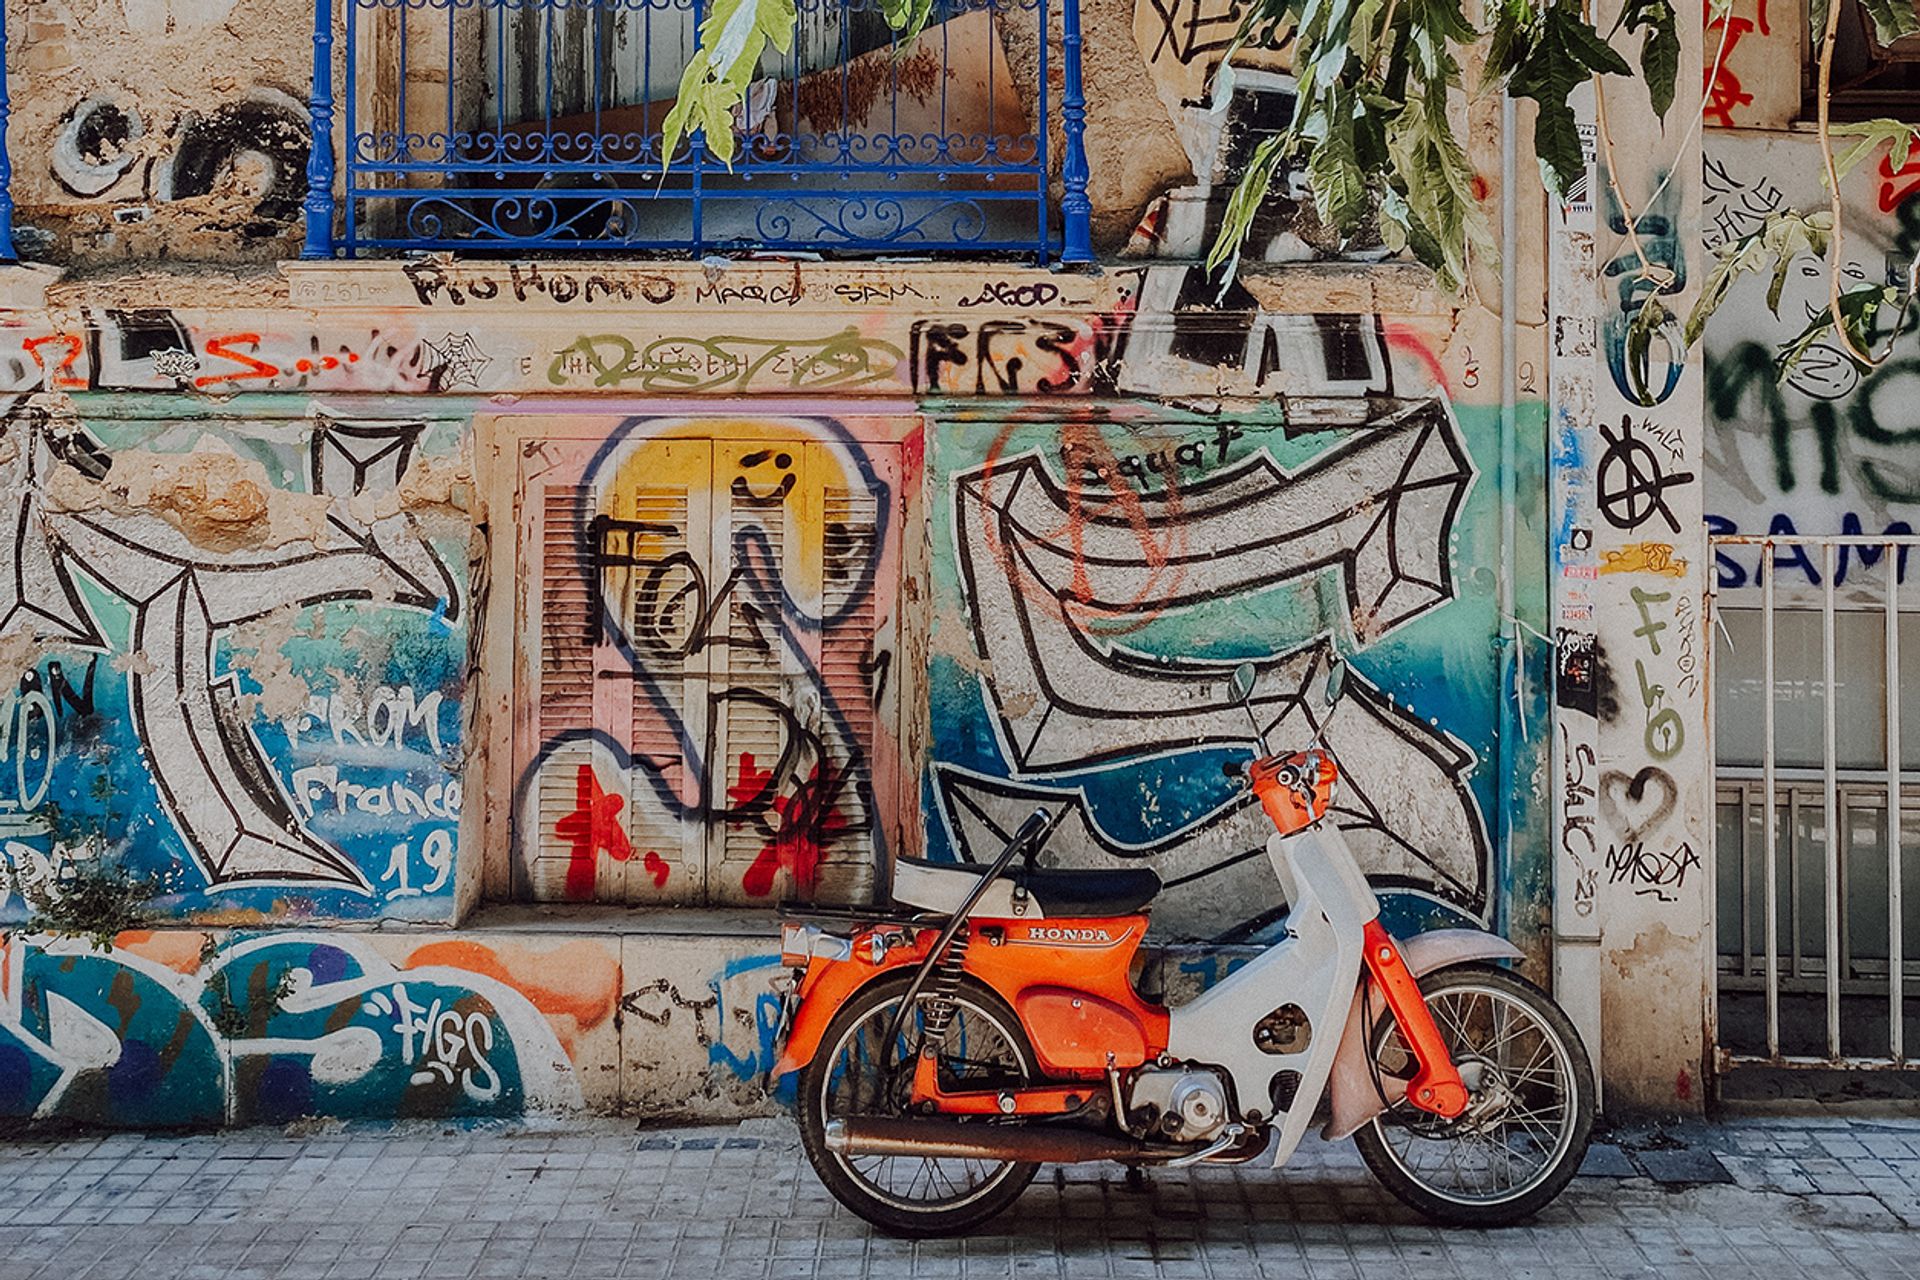 A moped in front of a graffitied wall